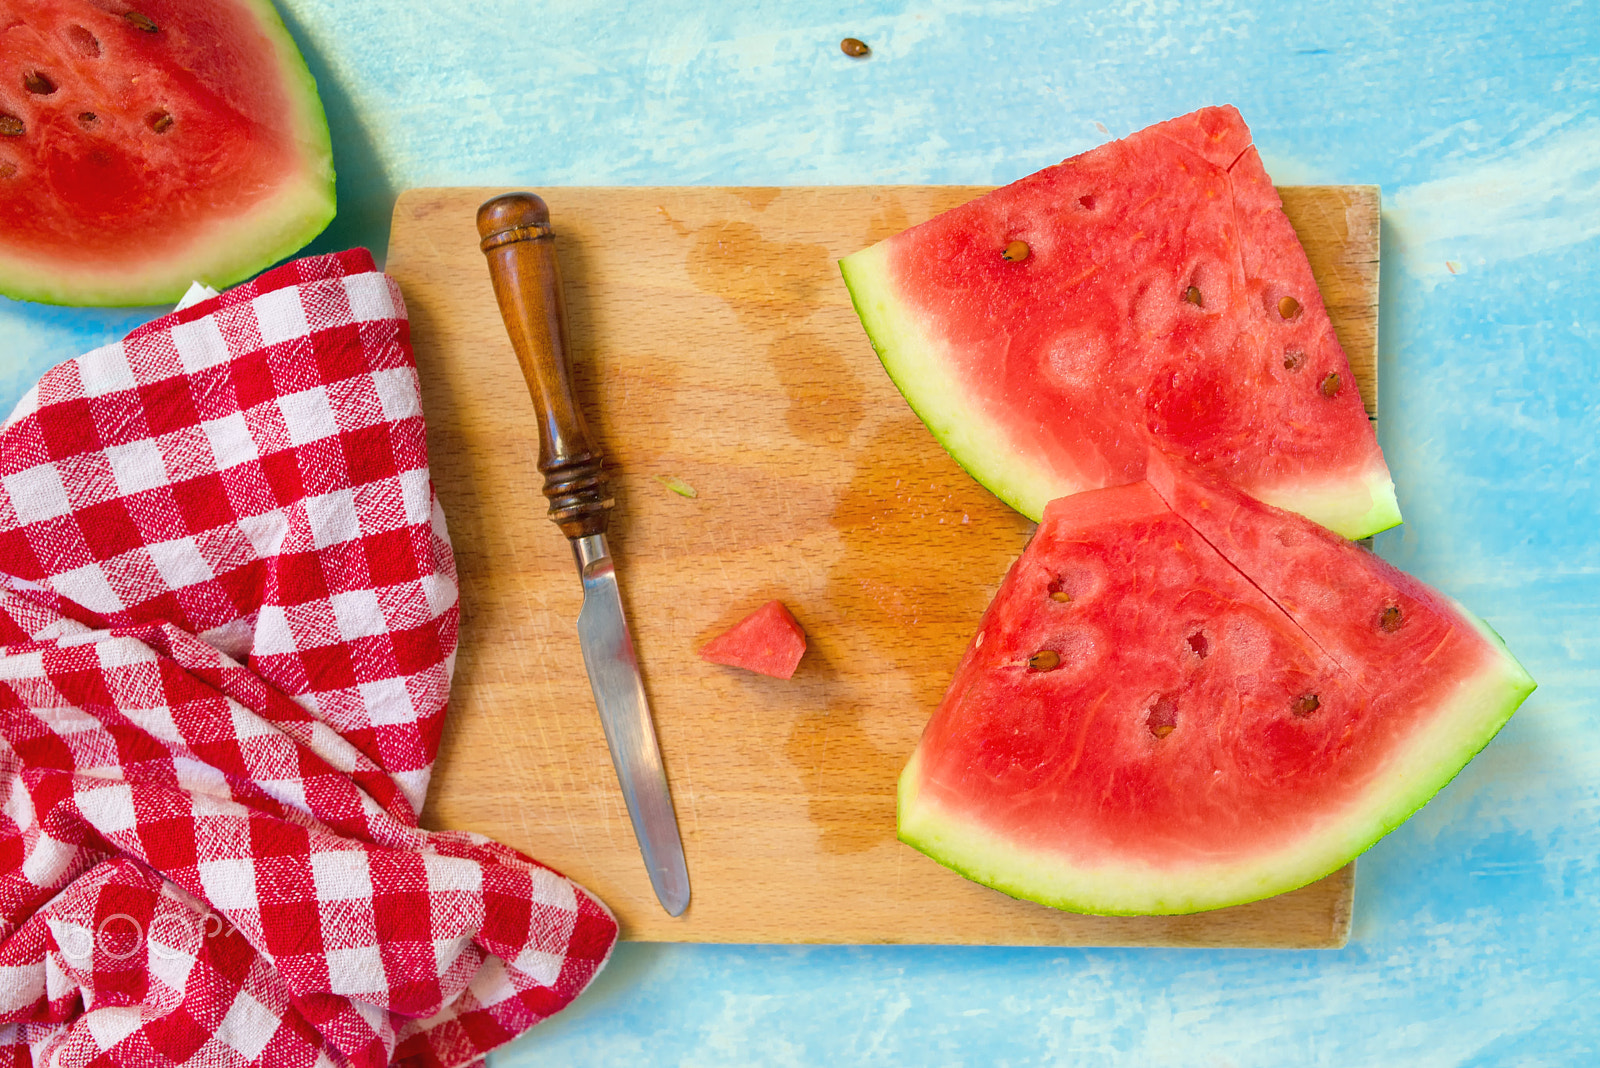 Nikon D600 sample photo. Watermelon slices on cutting board, top view photography